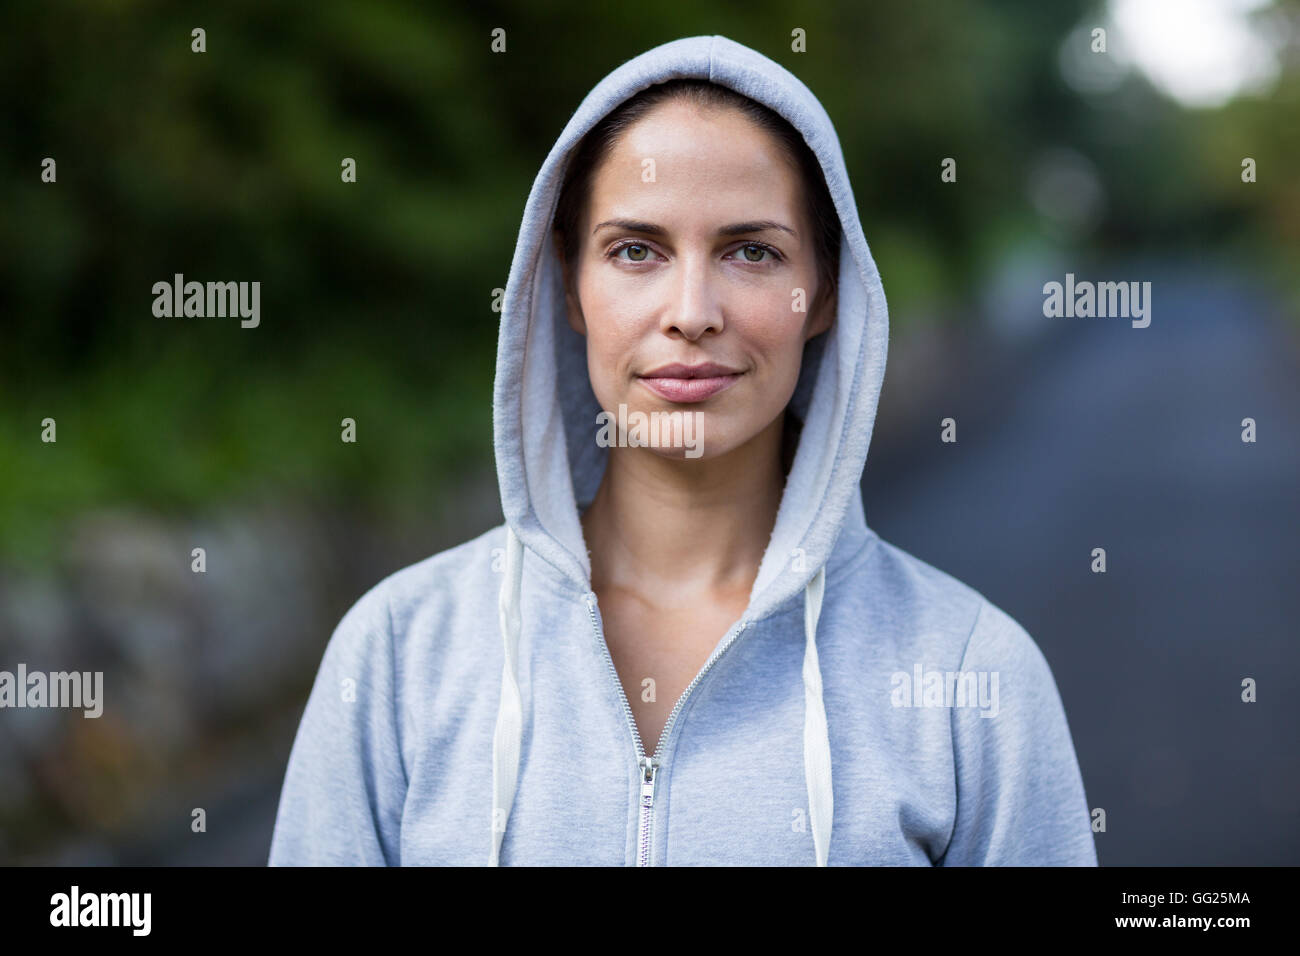 Confident woman wearing hooded sweater Stock Photo